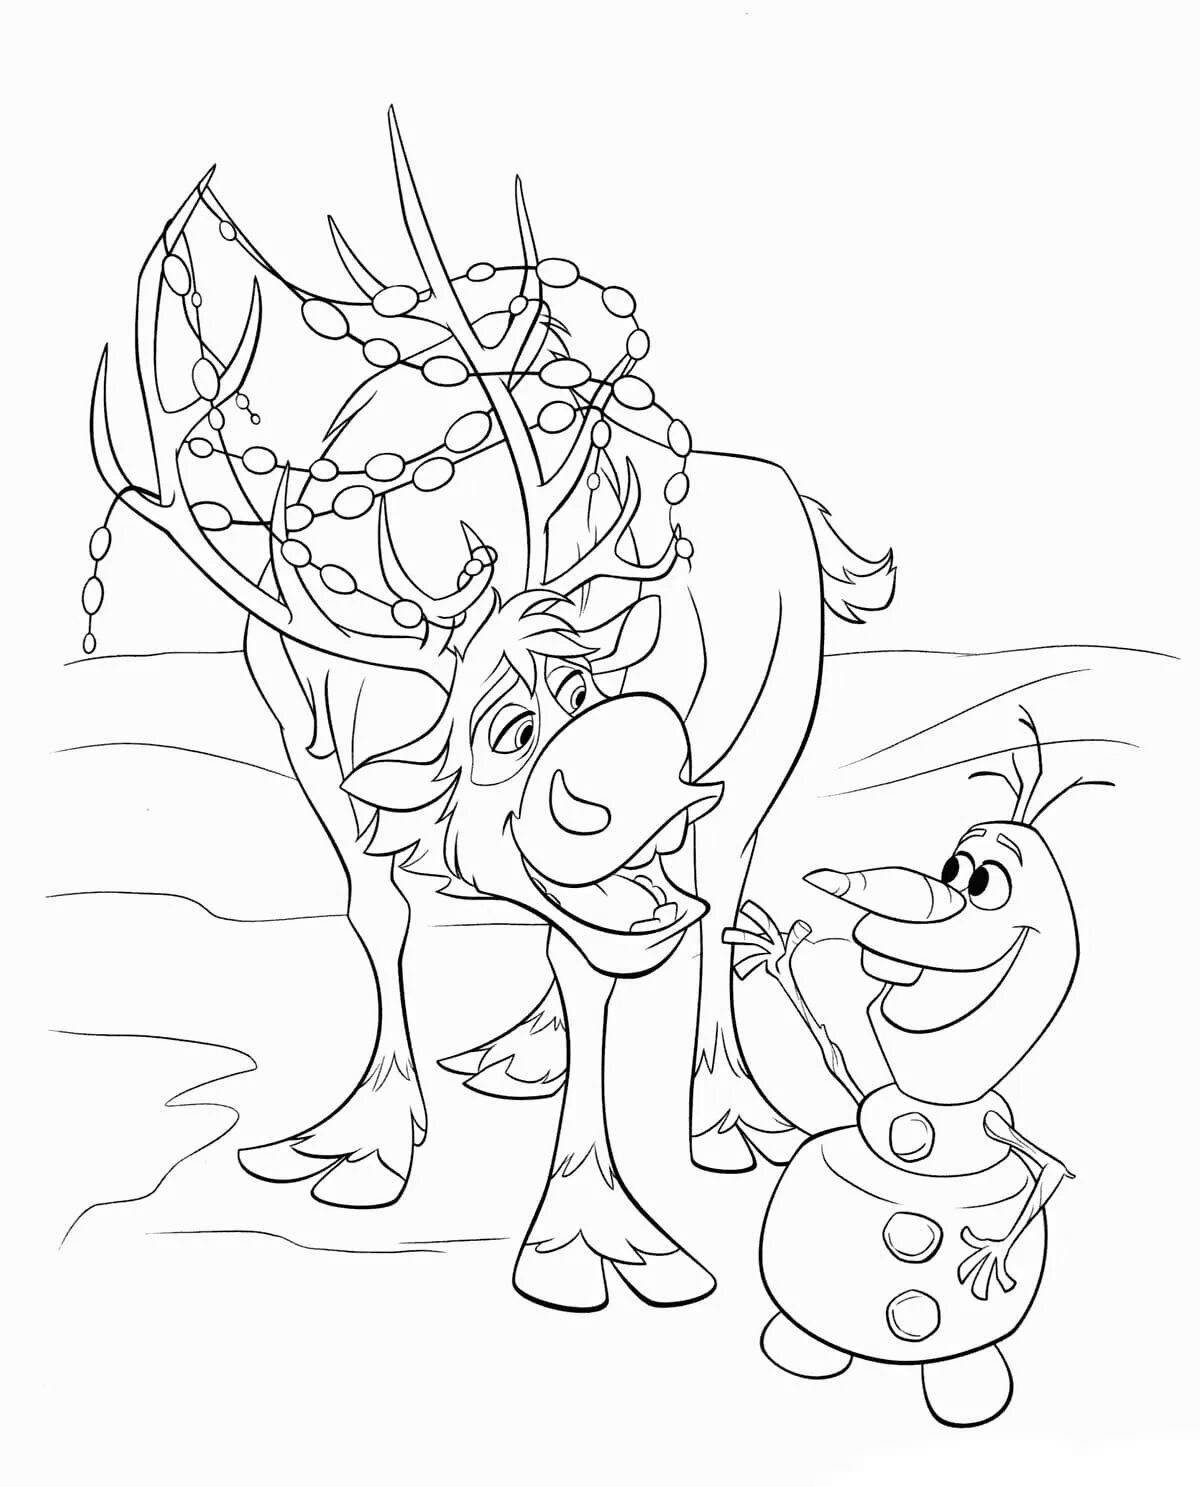 Olaf misty cold heart coloring page